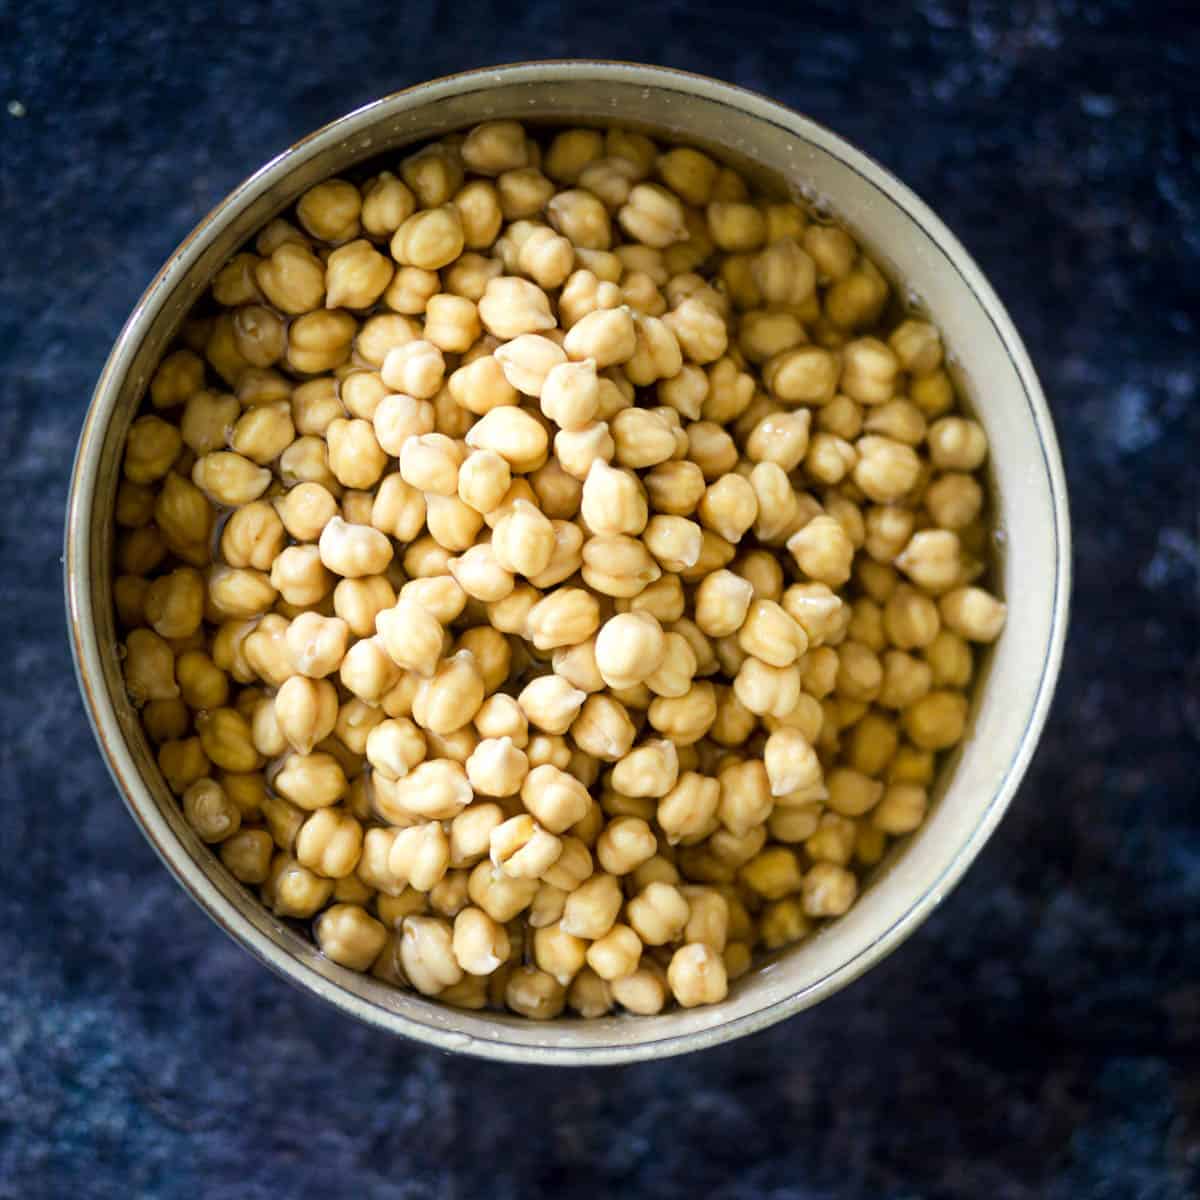 Chickpeas double in size after soaking for 6-8 hours.